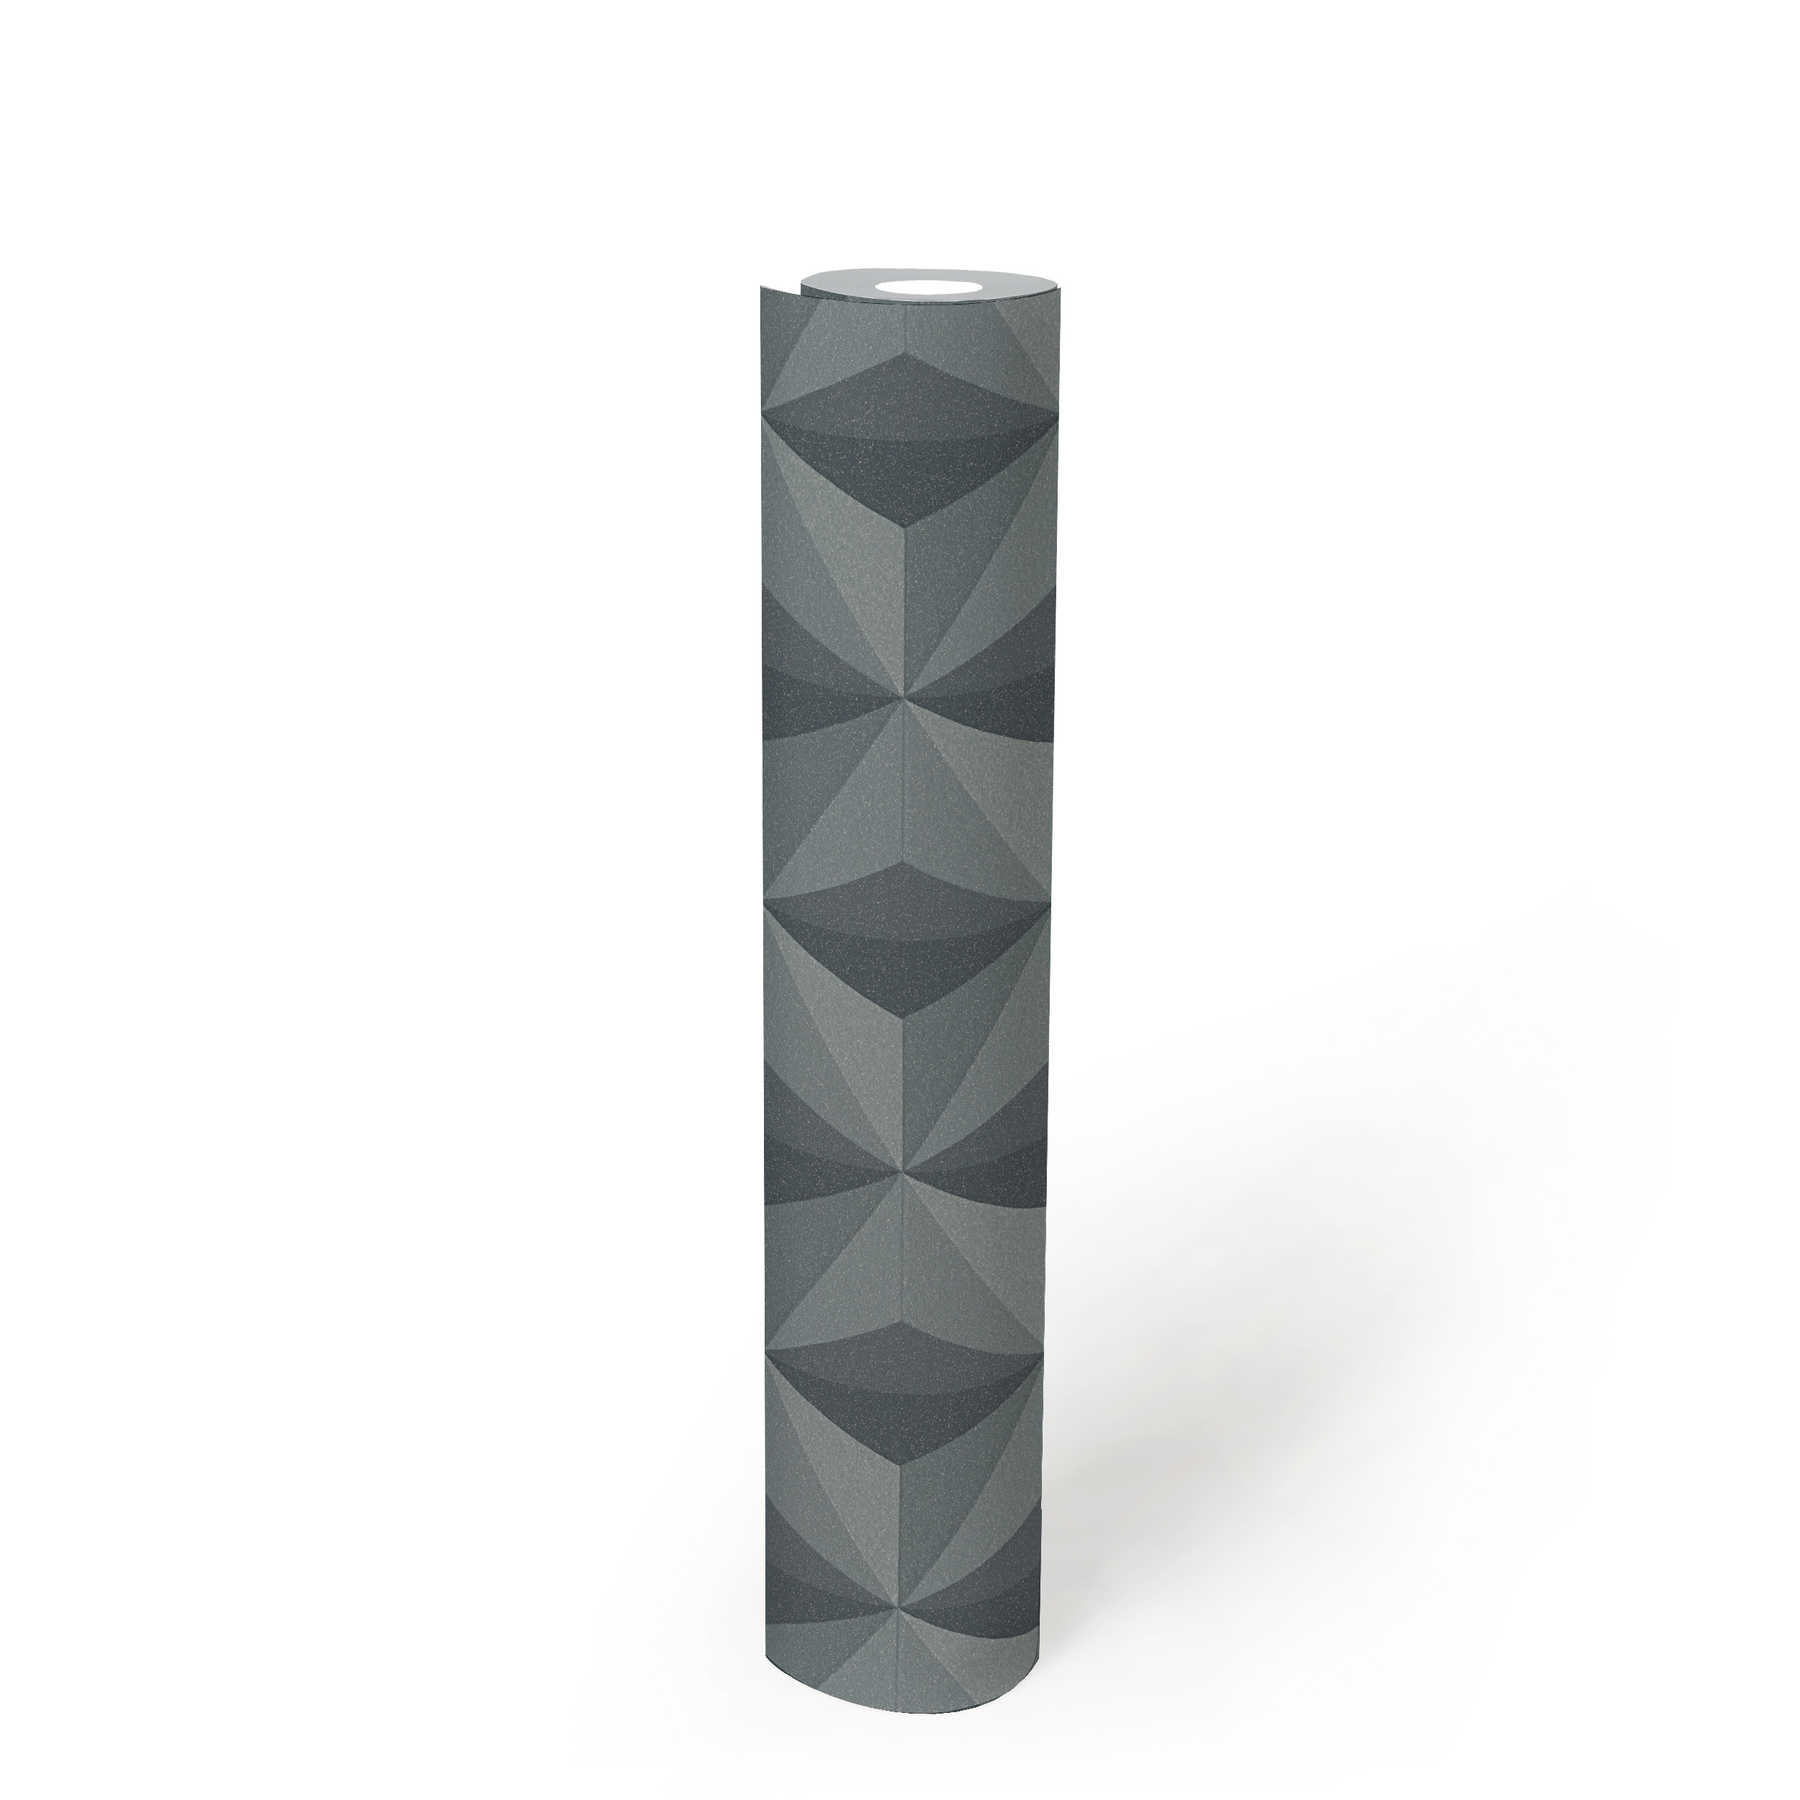             Non-woven wallpaper with 3D effect & geometric pattern - black
        